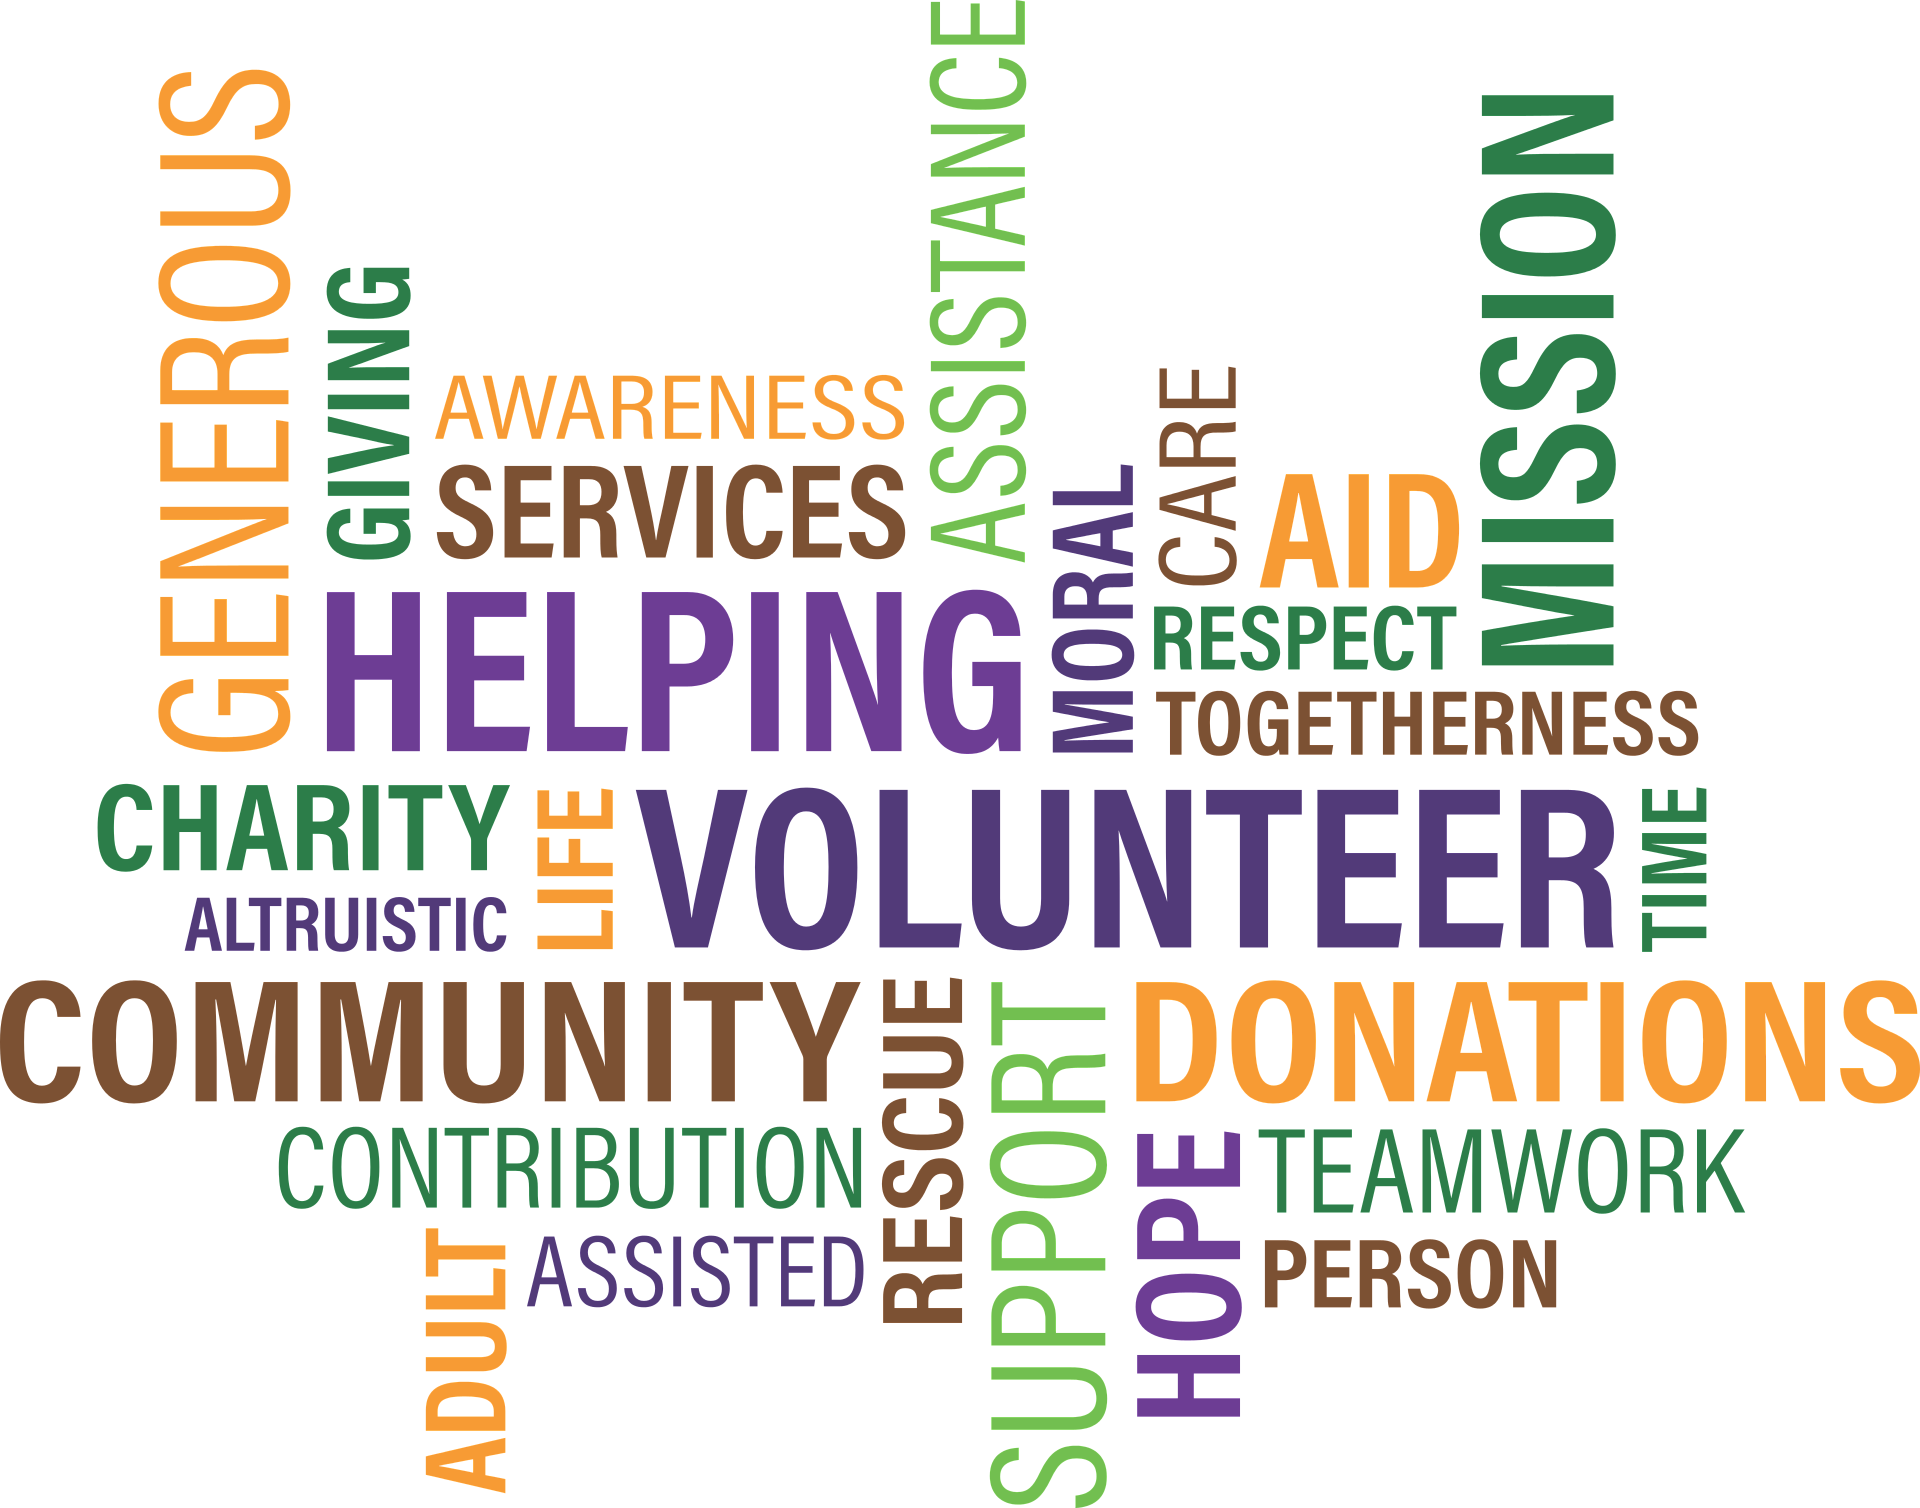 Fundraising words and ideas